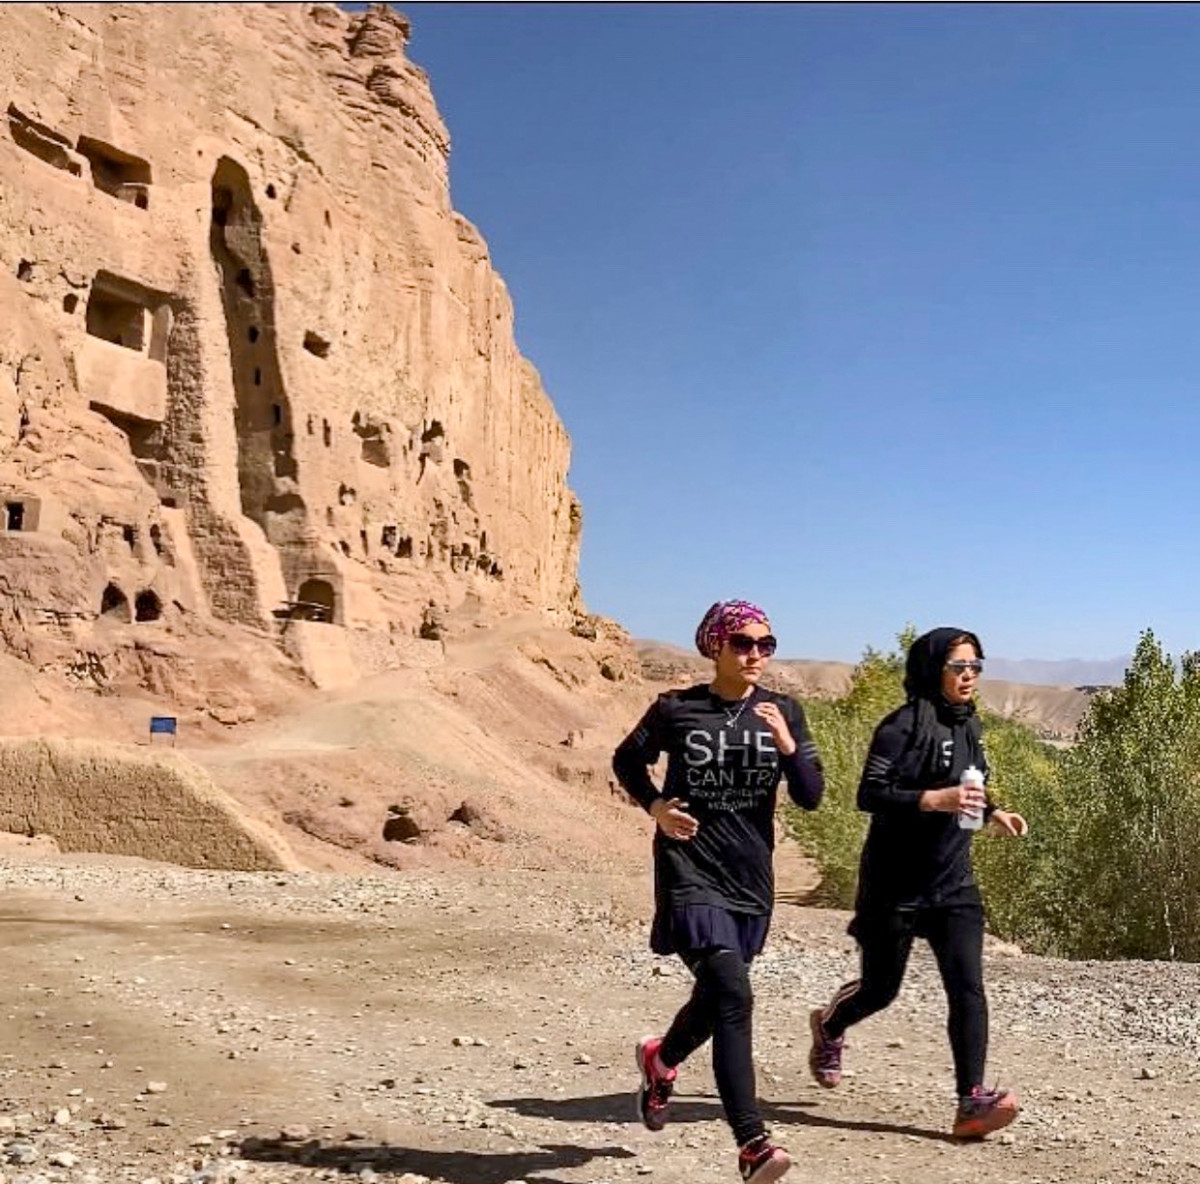 In running, says Case, Rezaie (right, in Bamyan) “found her voice. [She] dared to attempt athletic feats that few would take on.”